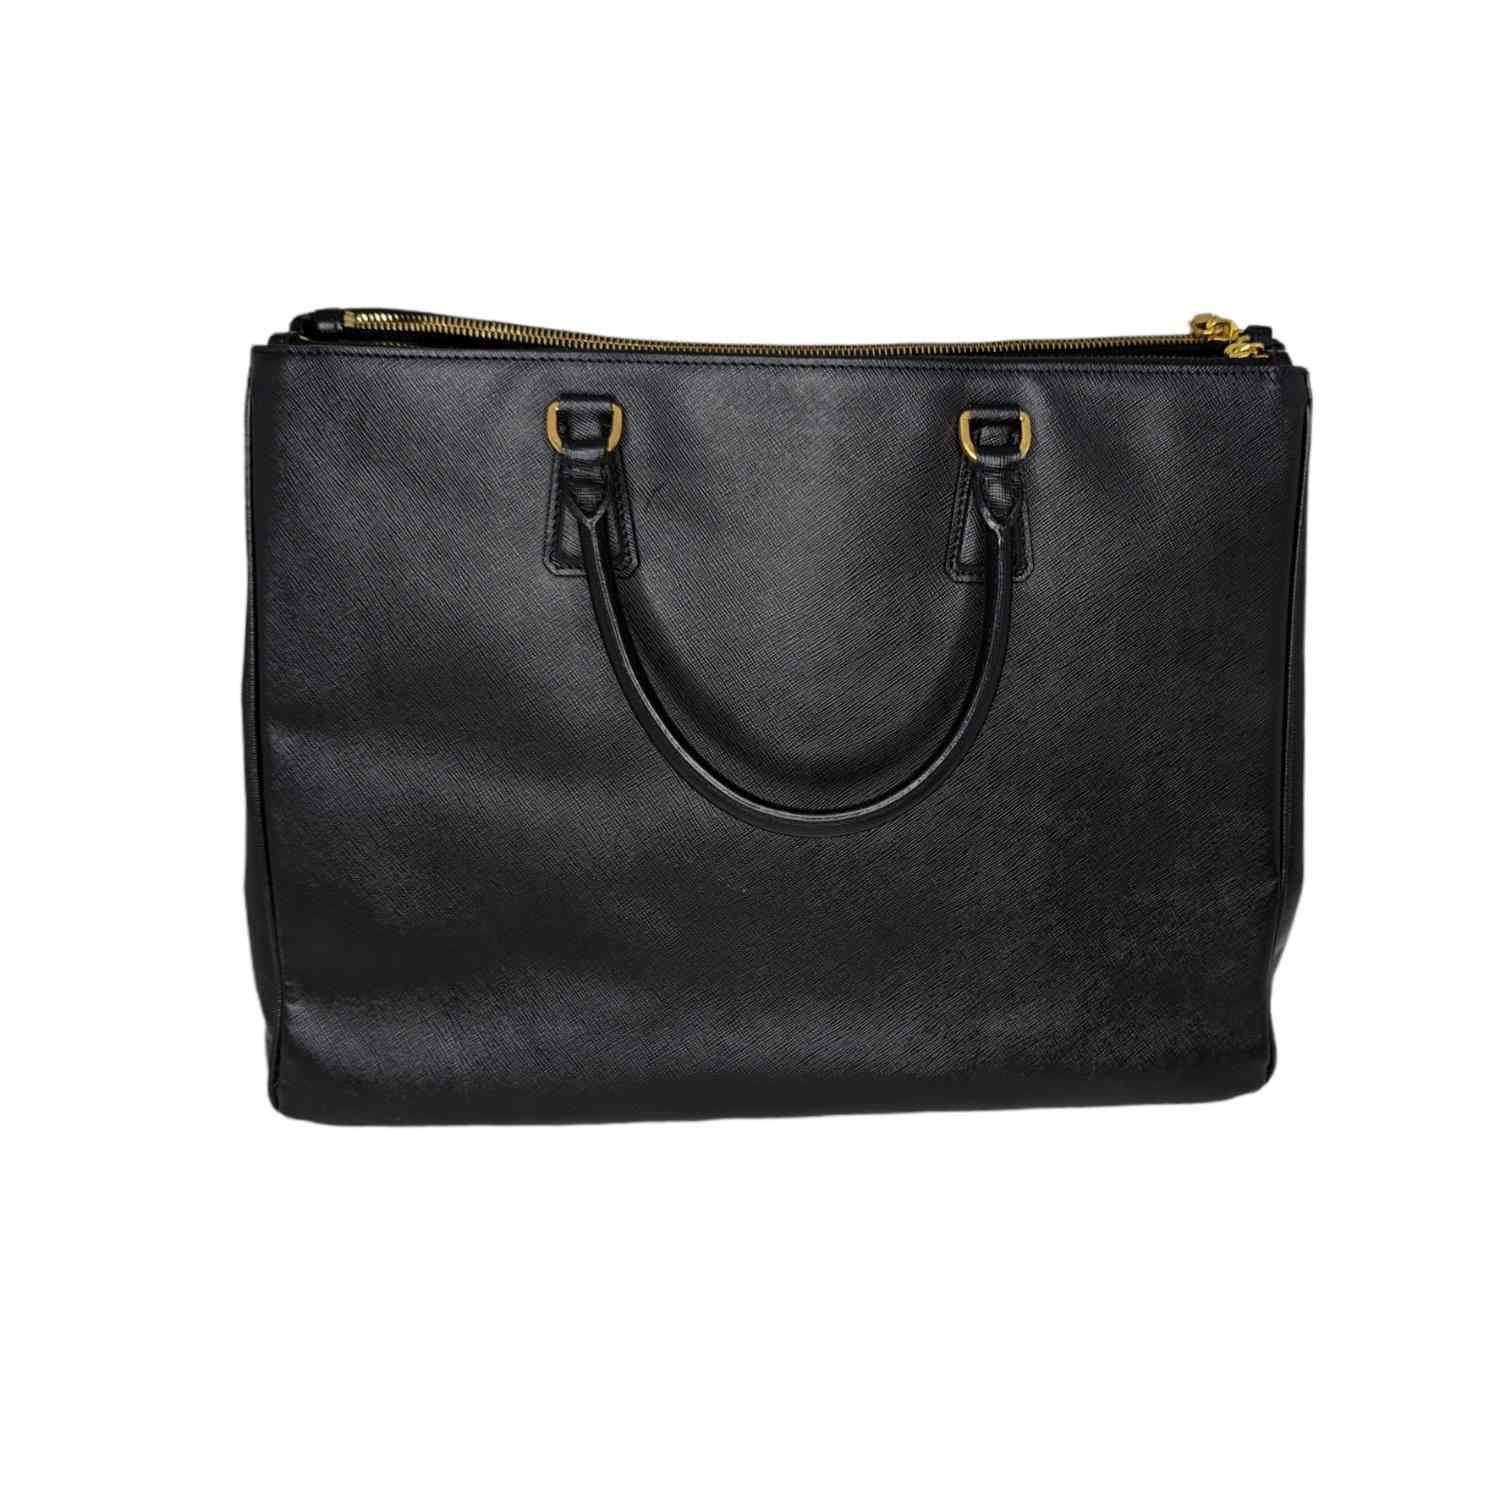 This chic tote is crafted of Prada signature Saffiano cross-grain leather in black. The tote features rolled leather top handles and polished gold links. The top is open to a black fabric interior with two full length zippered pockets, a zipper